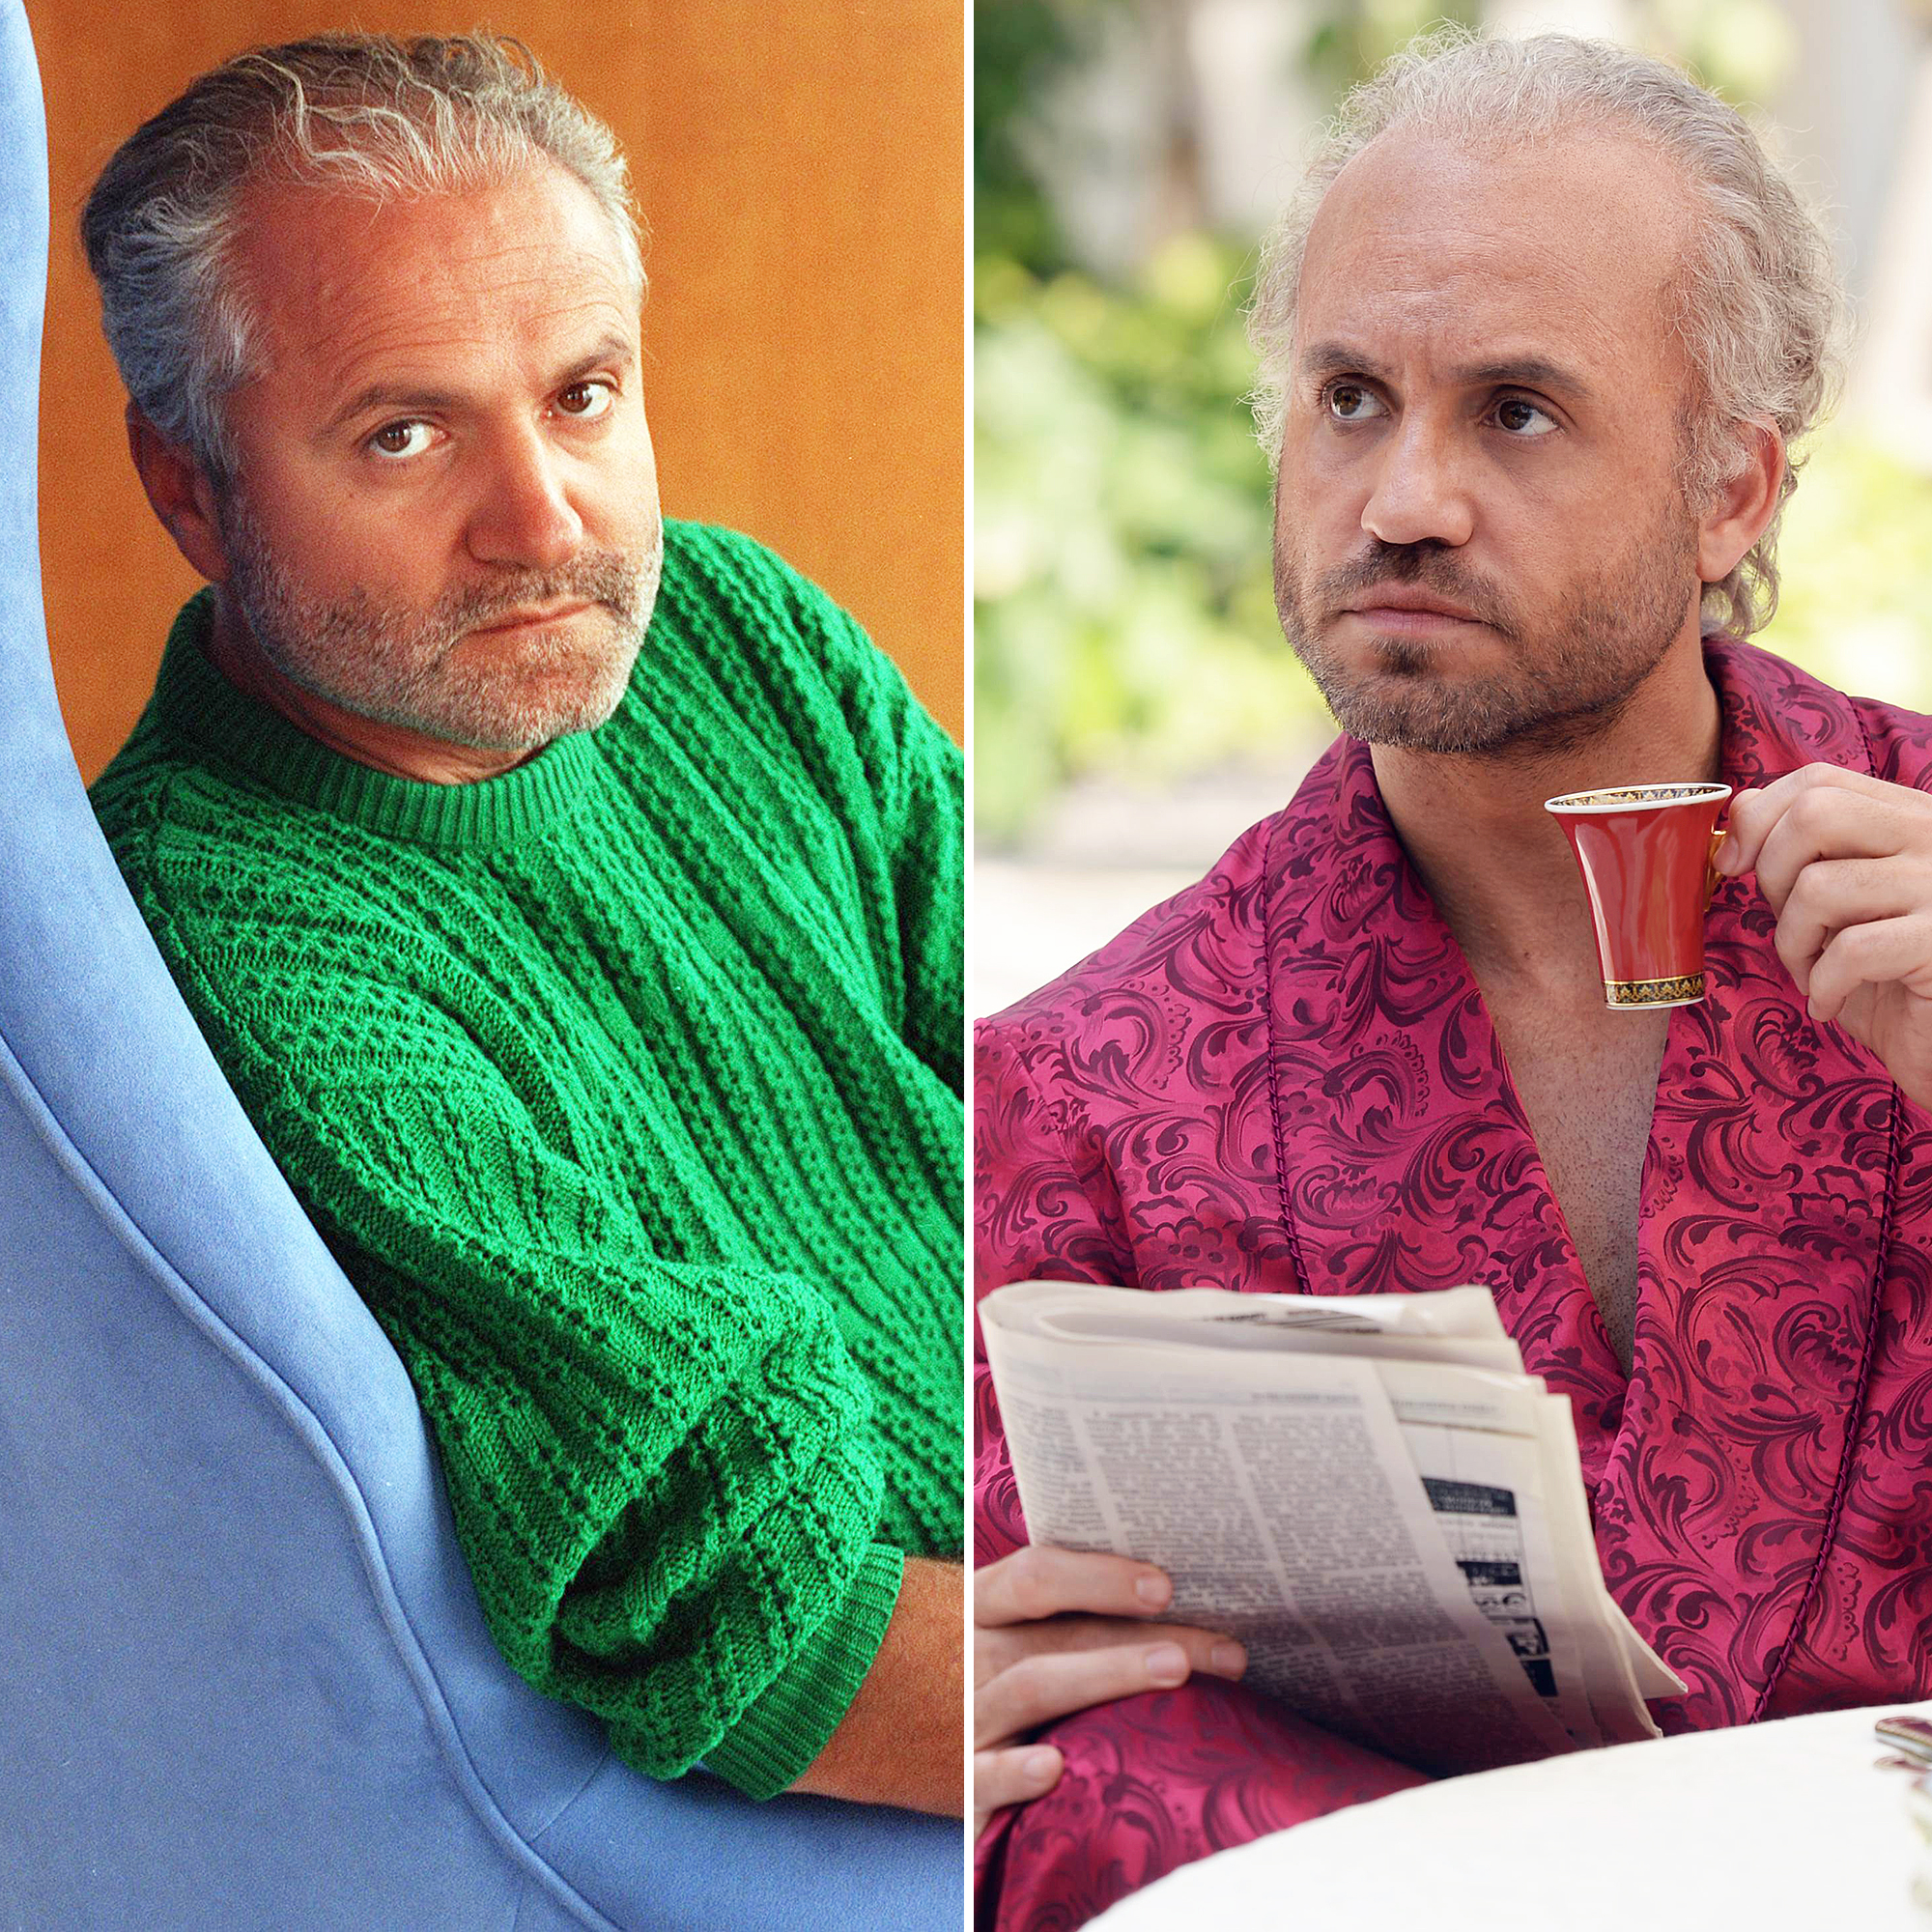 Assassination of Gianni Versace' Cast vs. Real-Life People They